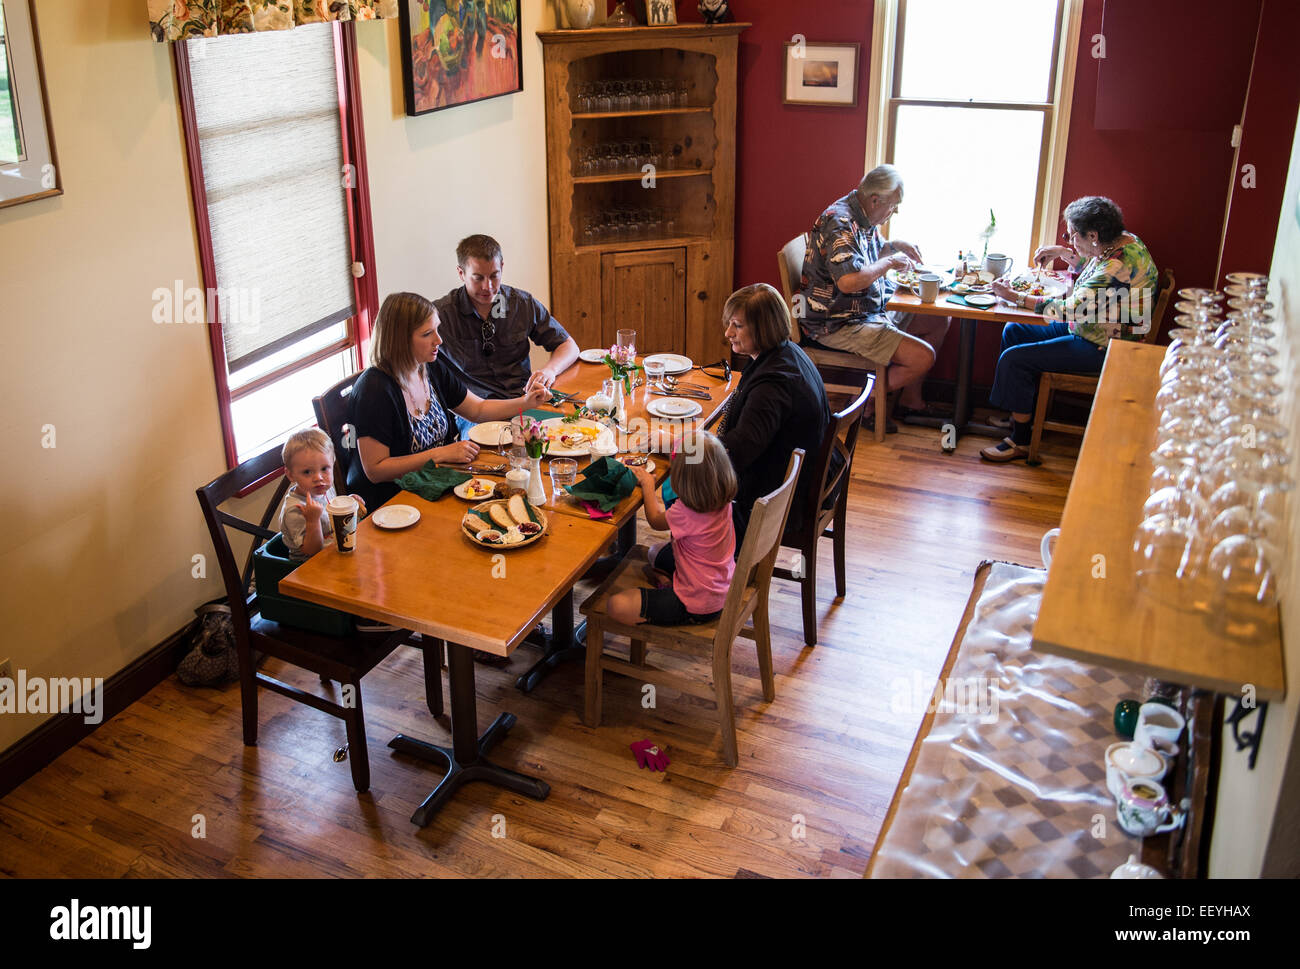 Guests enjoy brunch at The Old Hotel restaurant in Twin Bridges, Montana, June 21, 2014. The  owners Bill and Paula Kinoshita are also the chefs and its ranked as one of the best places to dine in Montana. (Photo by Ami Vitale) Stock Photo